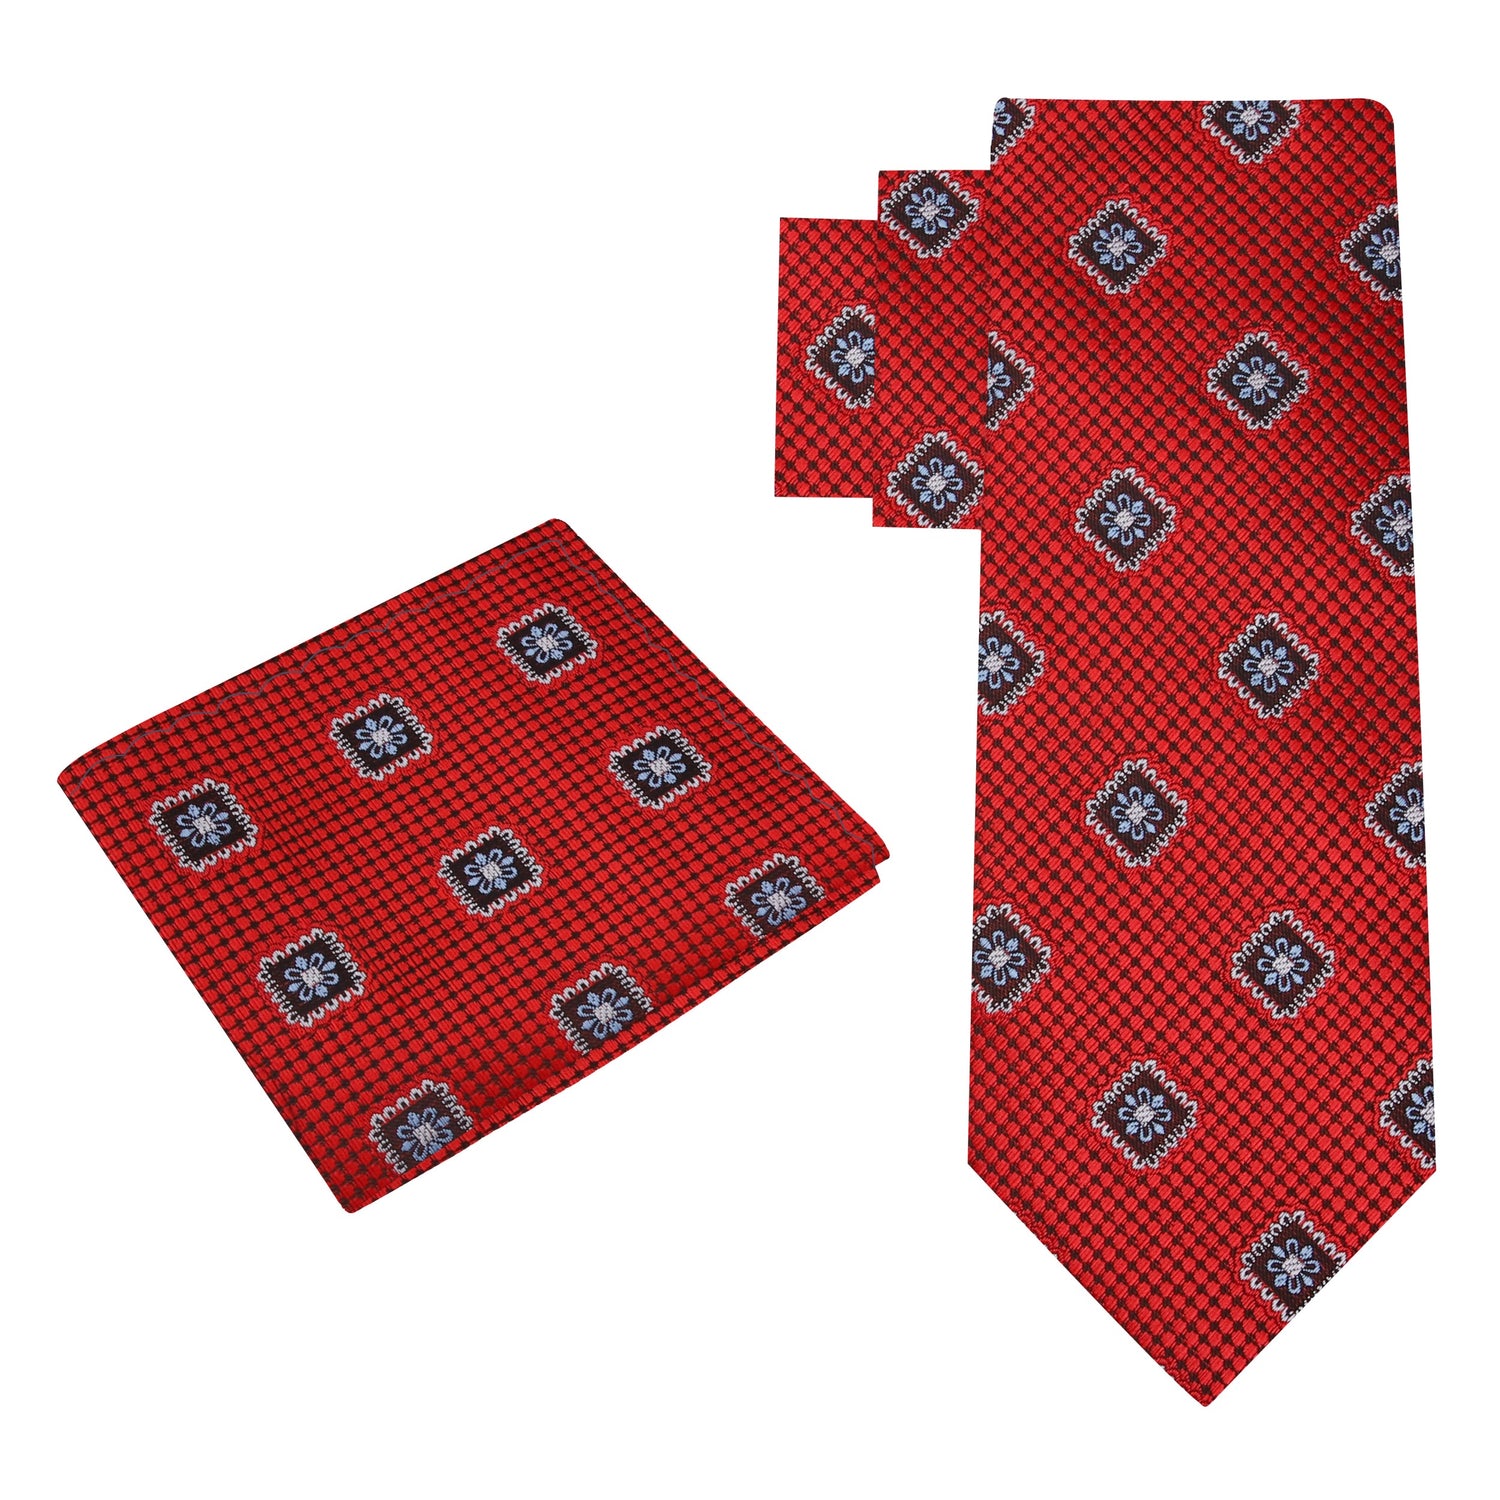 Alt View: Red Geometric Medallion Tie and Pocket Square